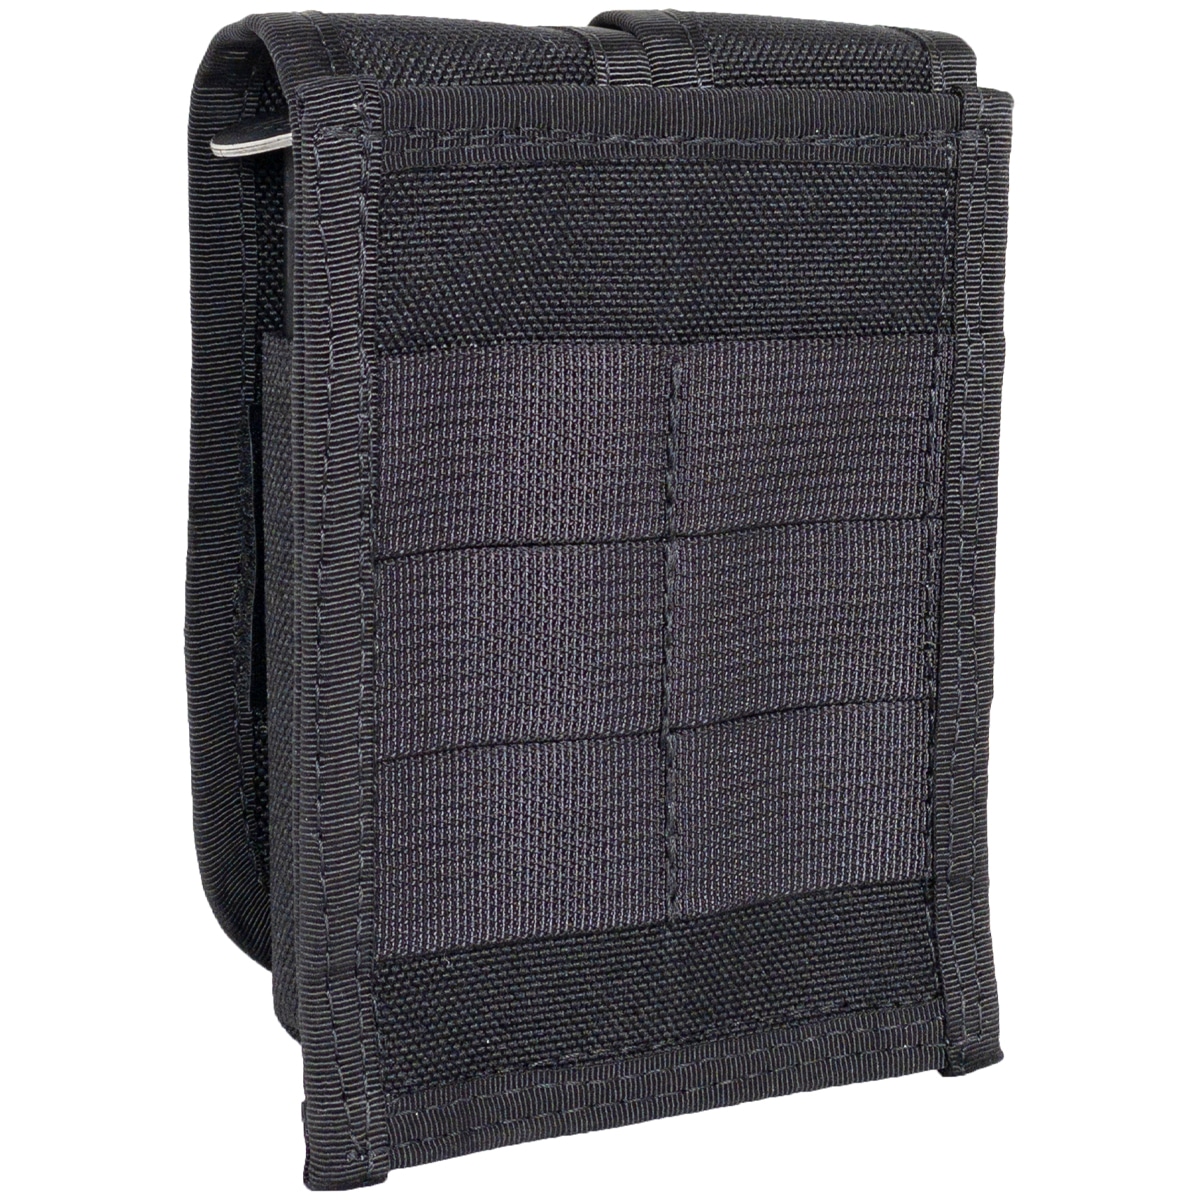 Double Magazine Molle Pocket for Cowell Tactical Vest